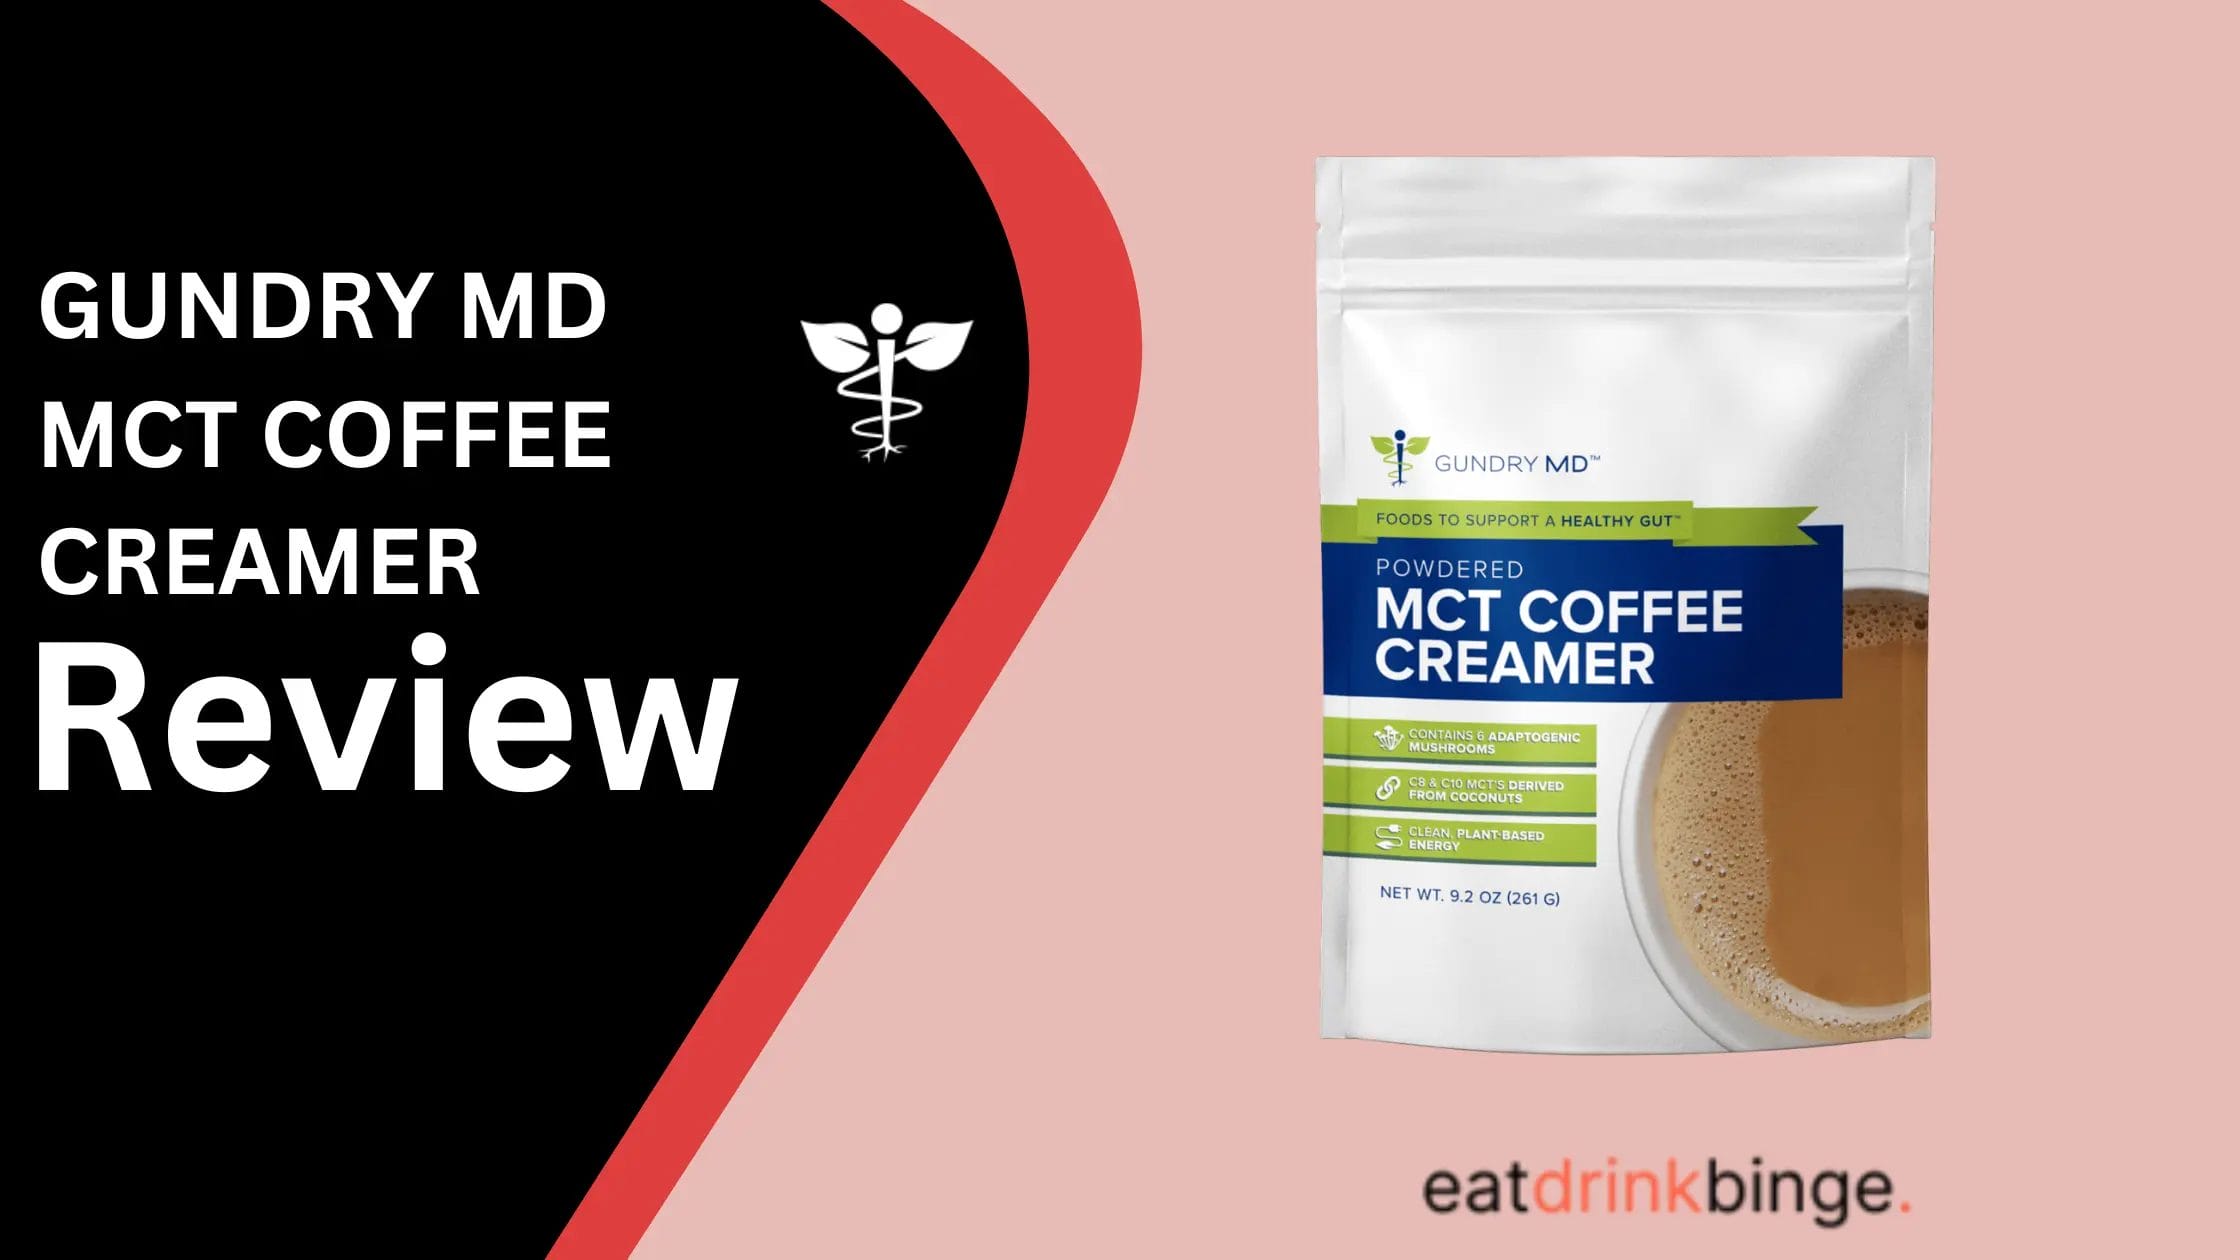 MCT coffee creamer featured image